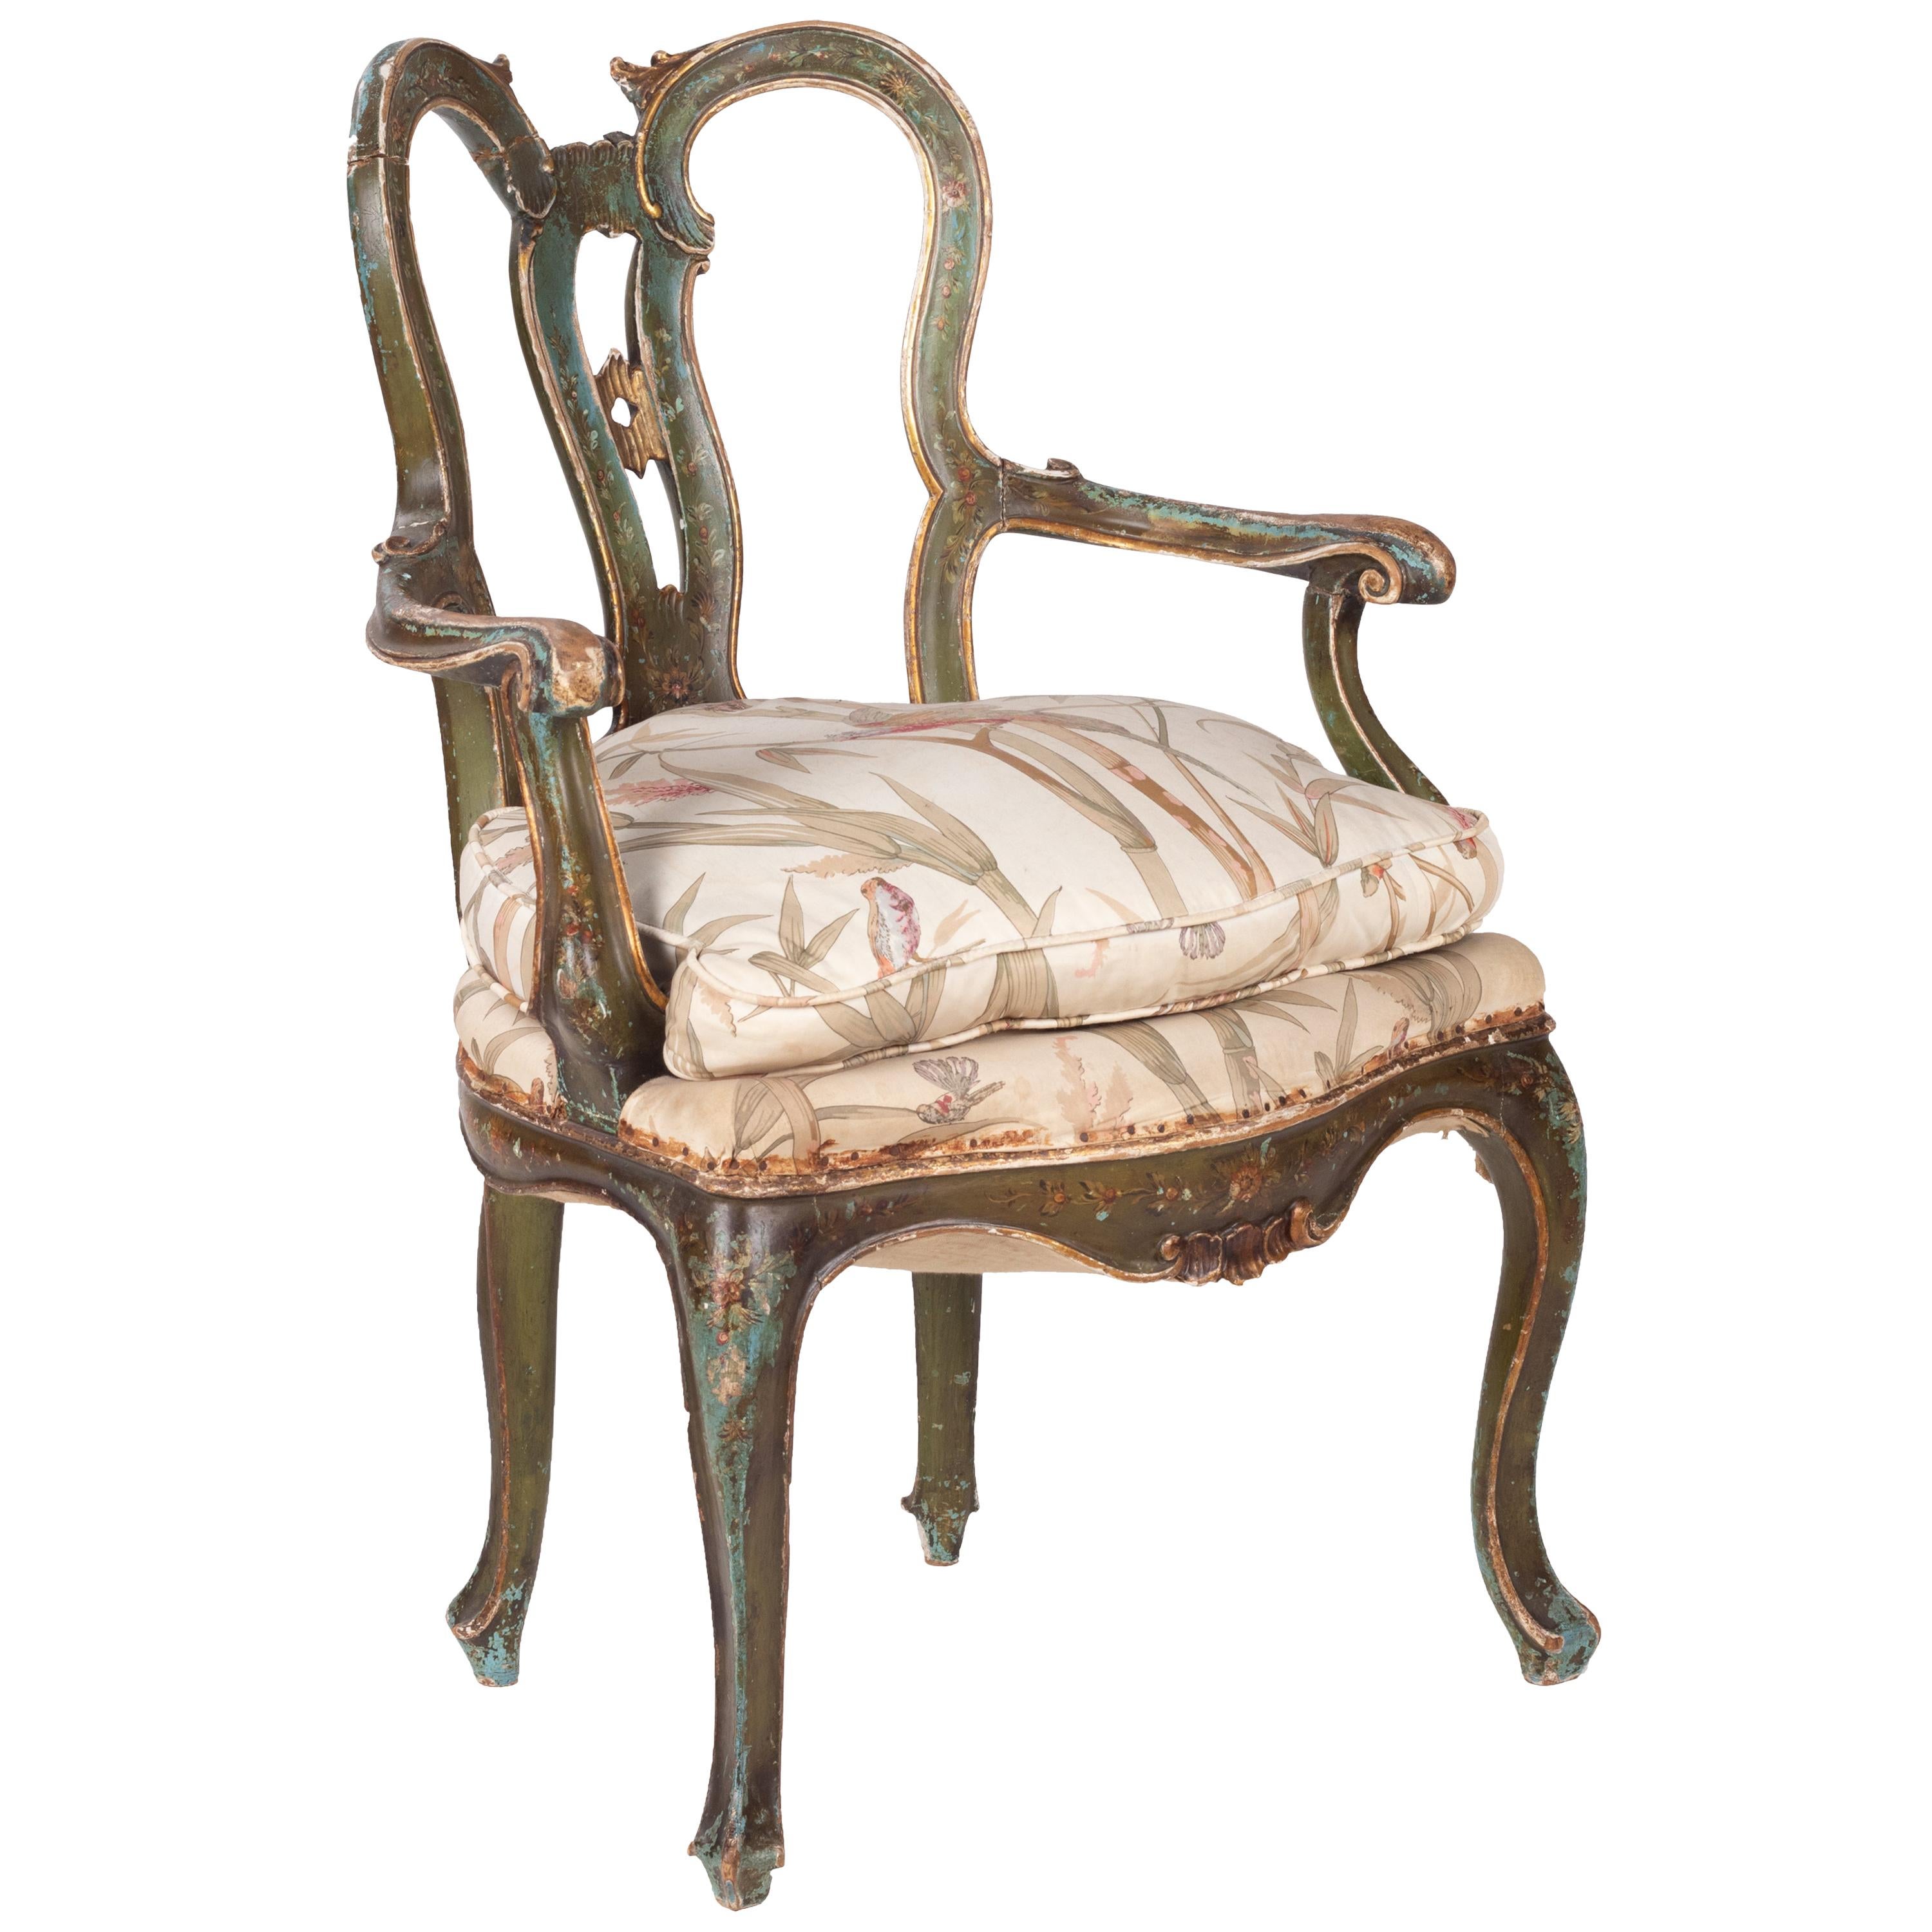 19th Century French Green and Golden Polychrome Armchair